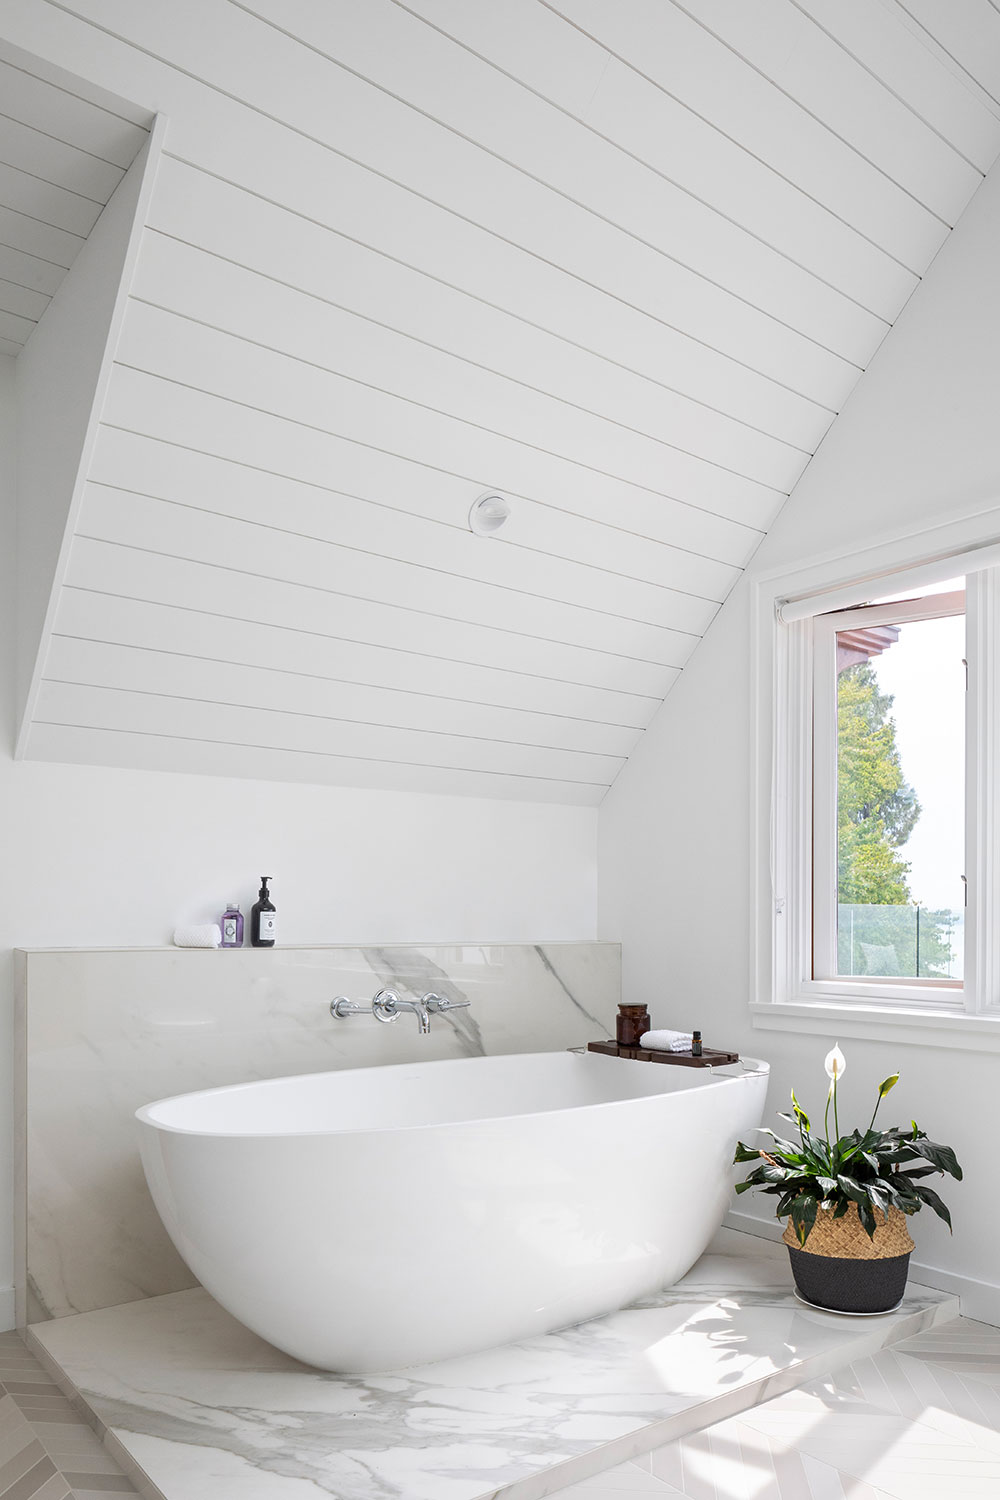 white freestanding soaker tub in renovated upstairs bathroom with angled ceilings